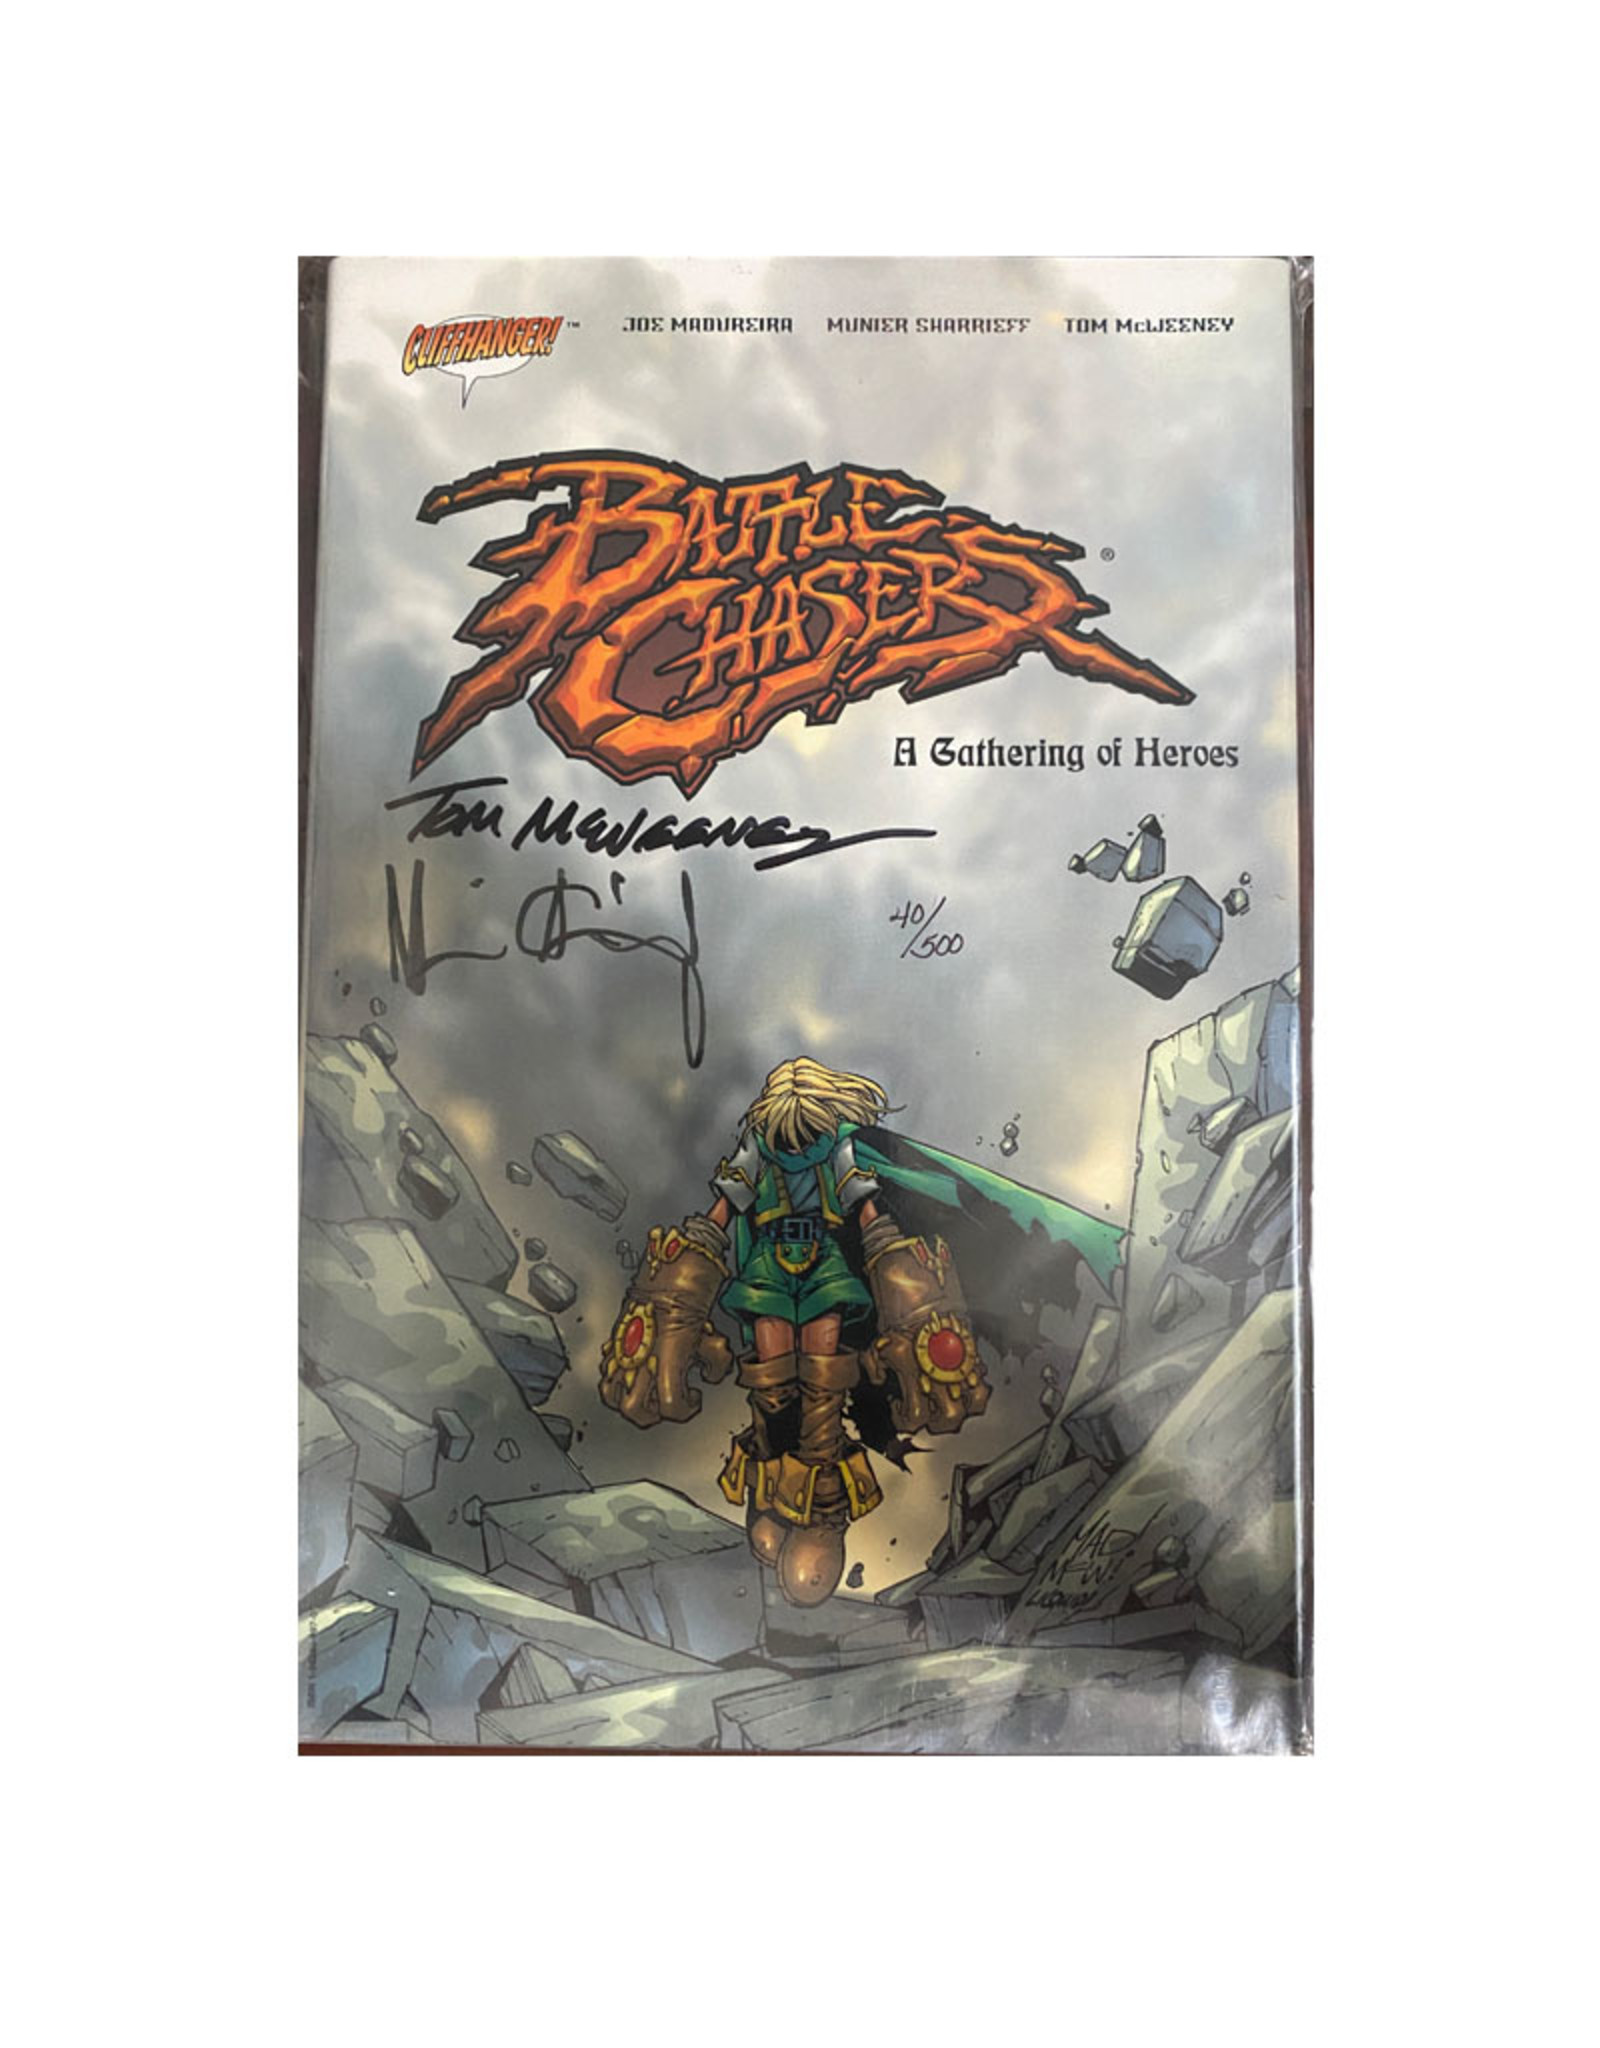 Battle Chasers: A Gathering of Heroes Hardcover signed by Munier Sharrieff and Tom McWeeney with COA 0040/500